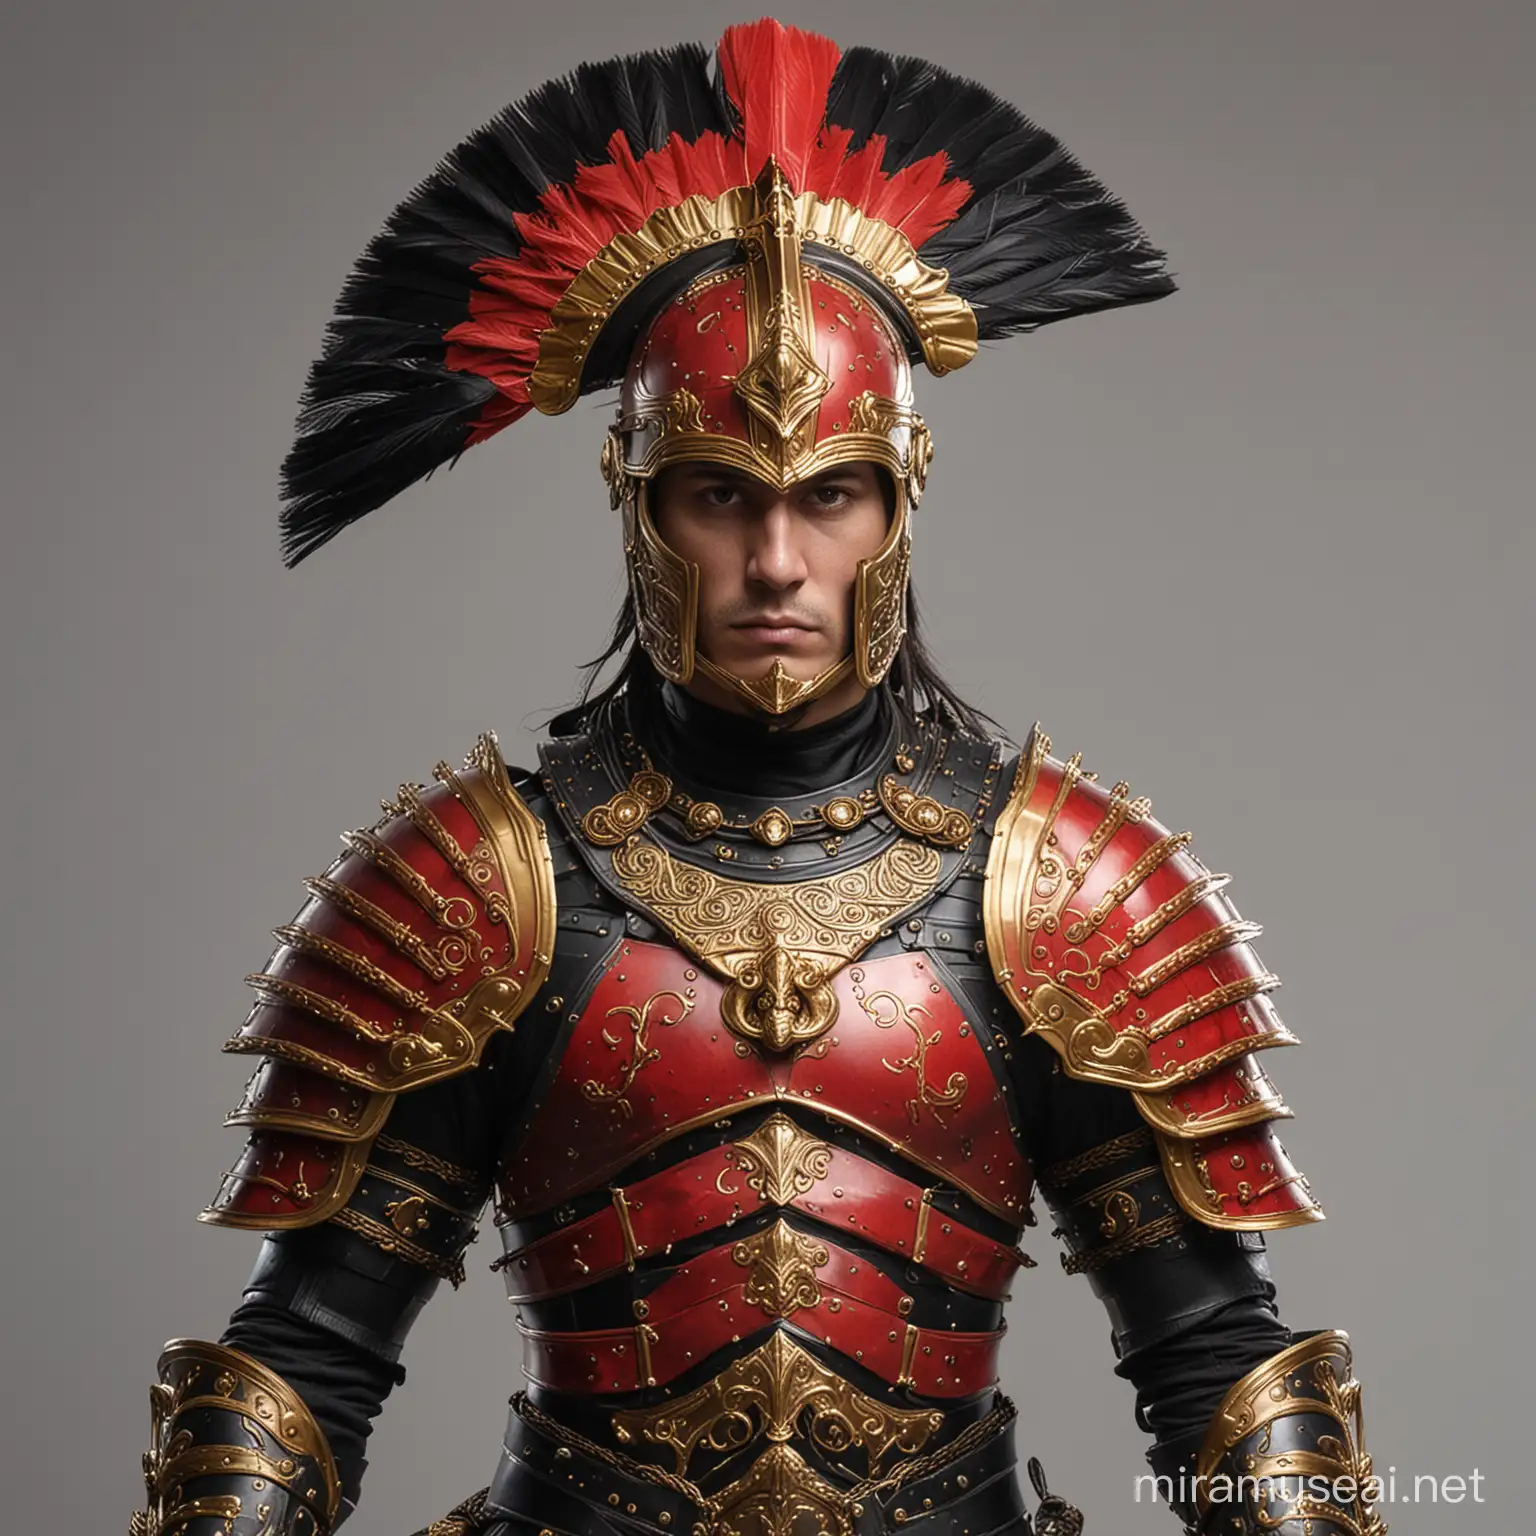 Majestic Male Warrior in Red and Black Armor with Golden Accents